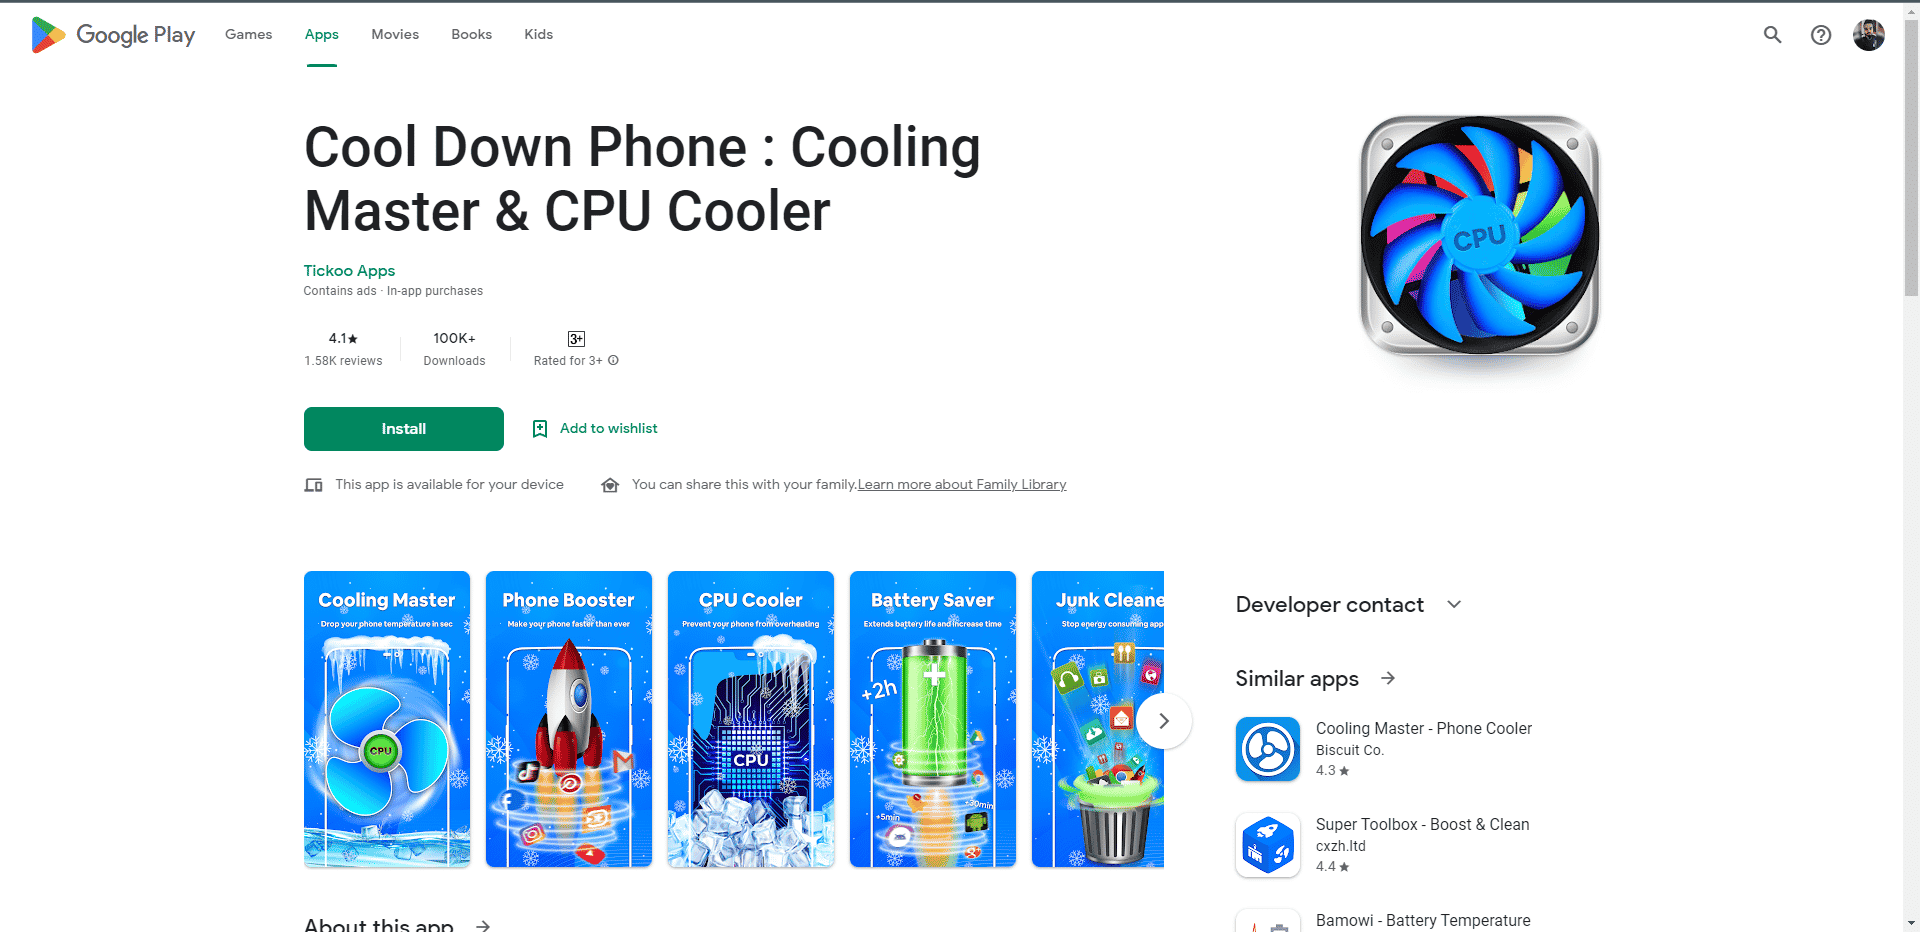 Cool Down Phone Cooling Master and CPU Cooler